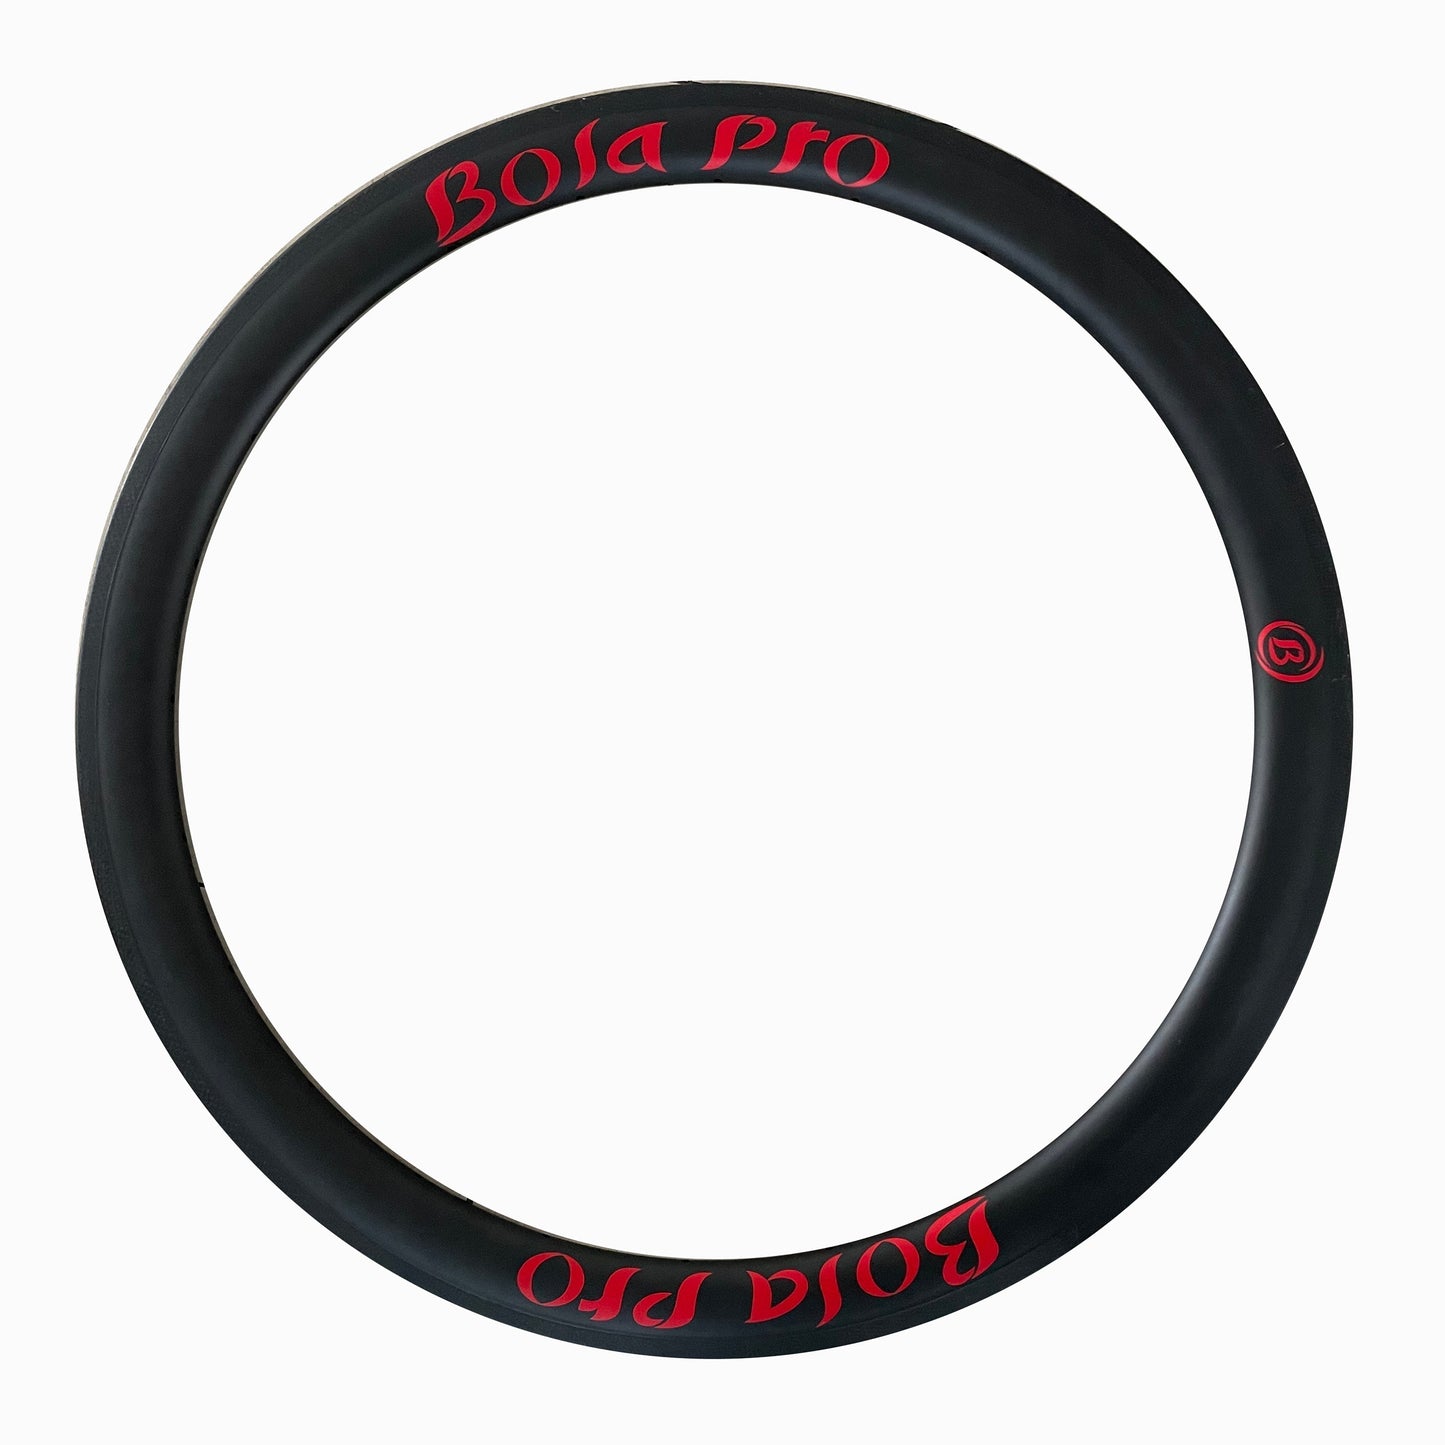 700c tubeless ready all road carbon bicycle rim 50mm high profile  28mm wide dynamic symmetric or asymmetric